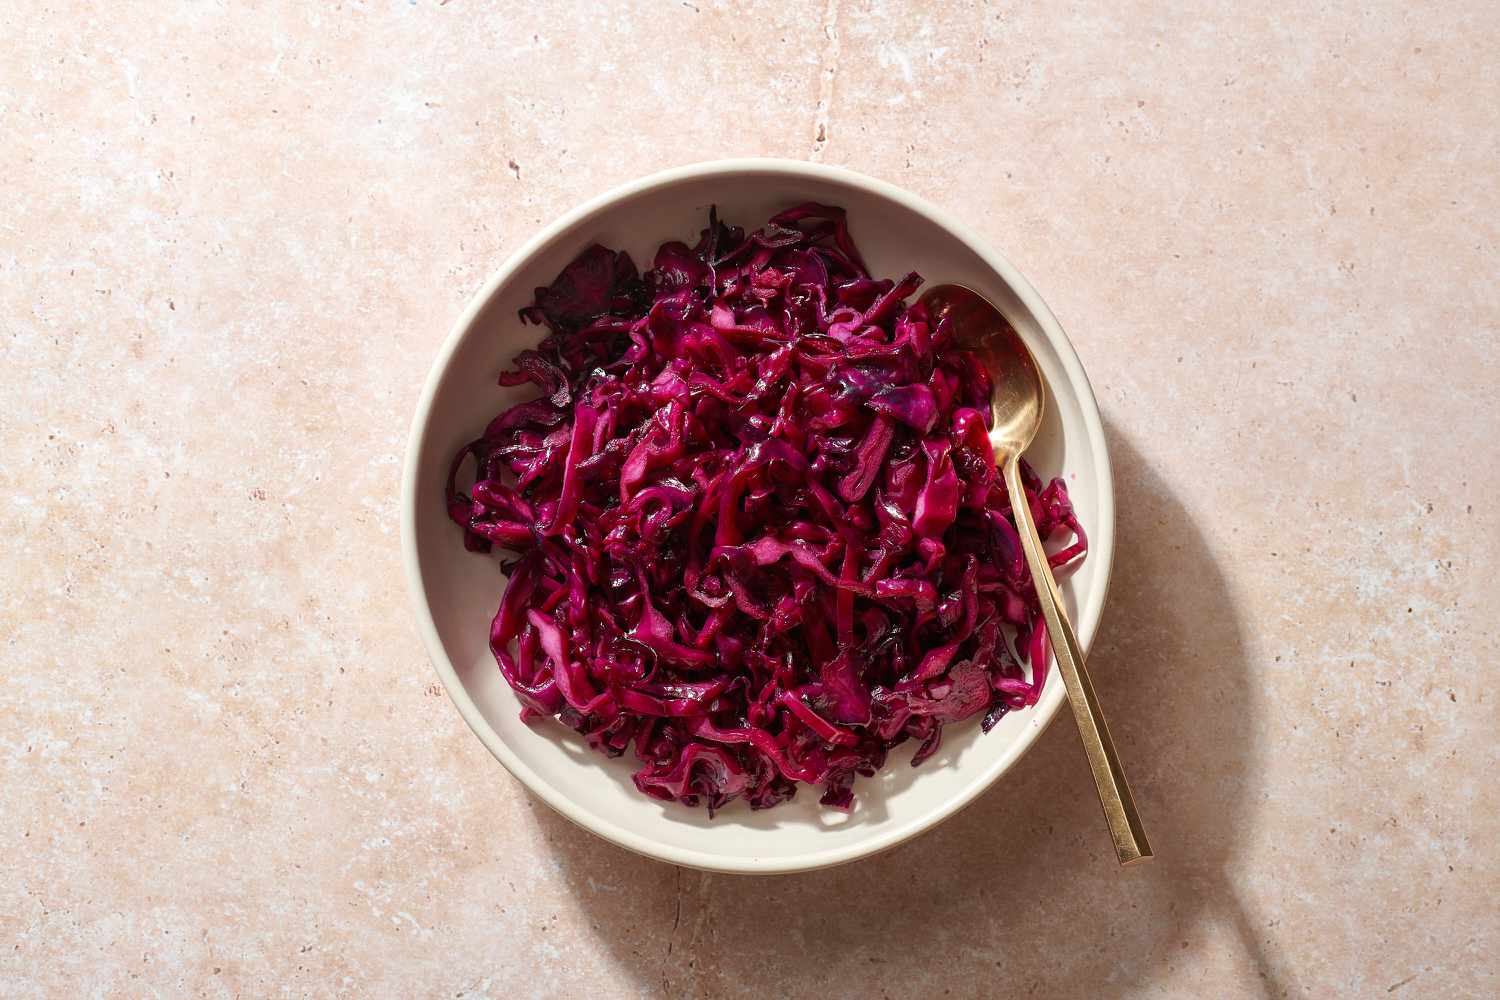 1155542-sauteed-red-cabbage-hero-02-2-bf36eea11bfe4dc4b9a86a732786dd2d.jpg